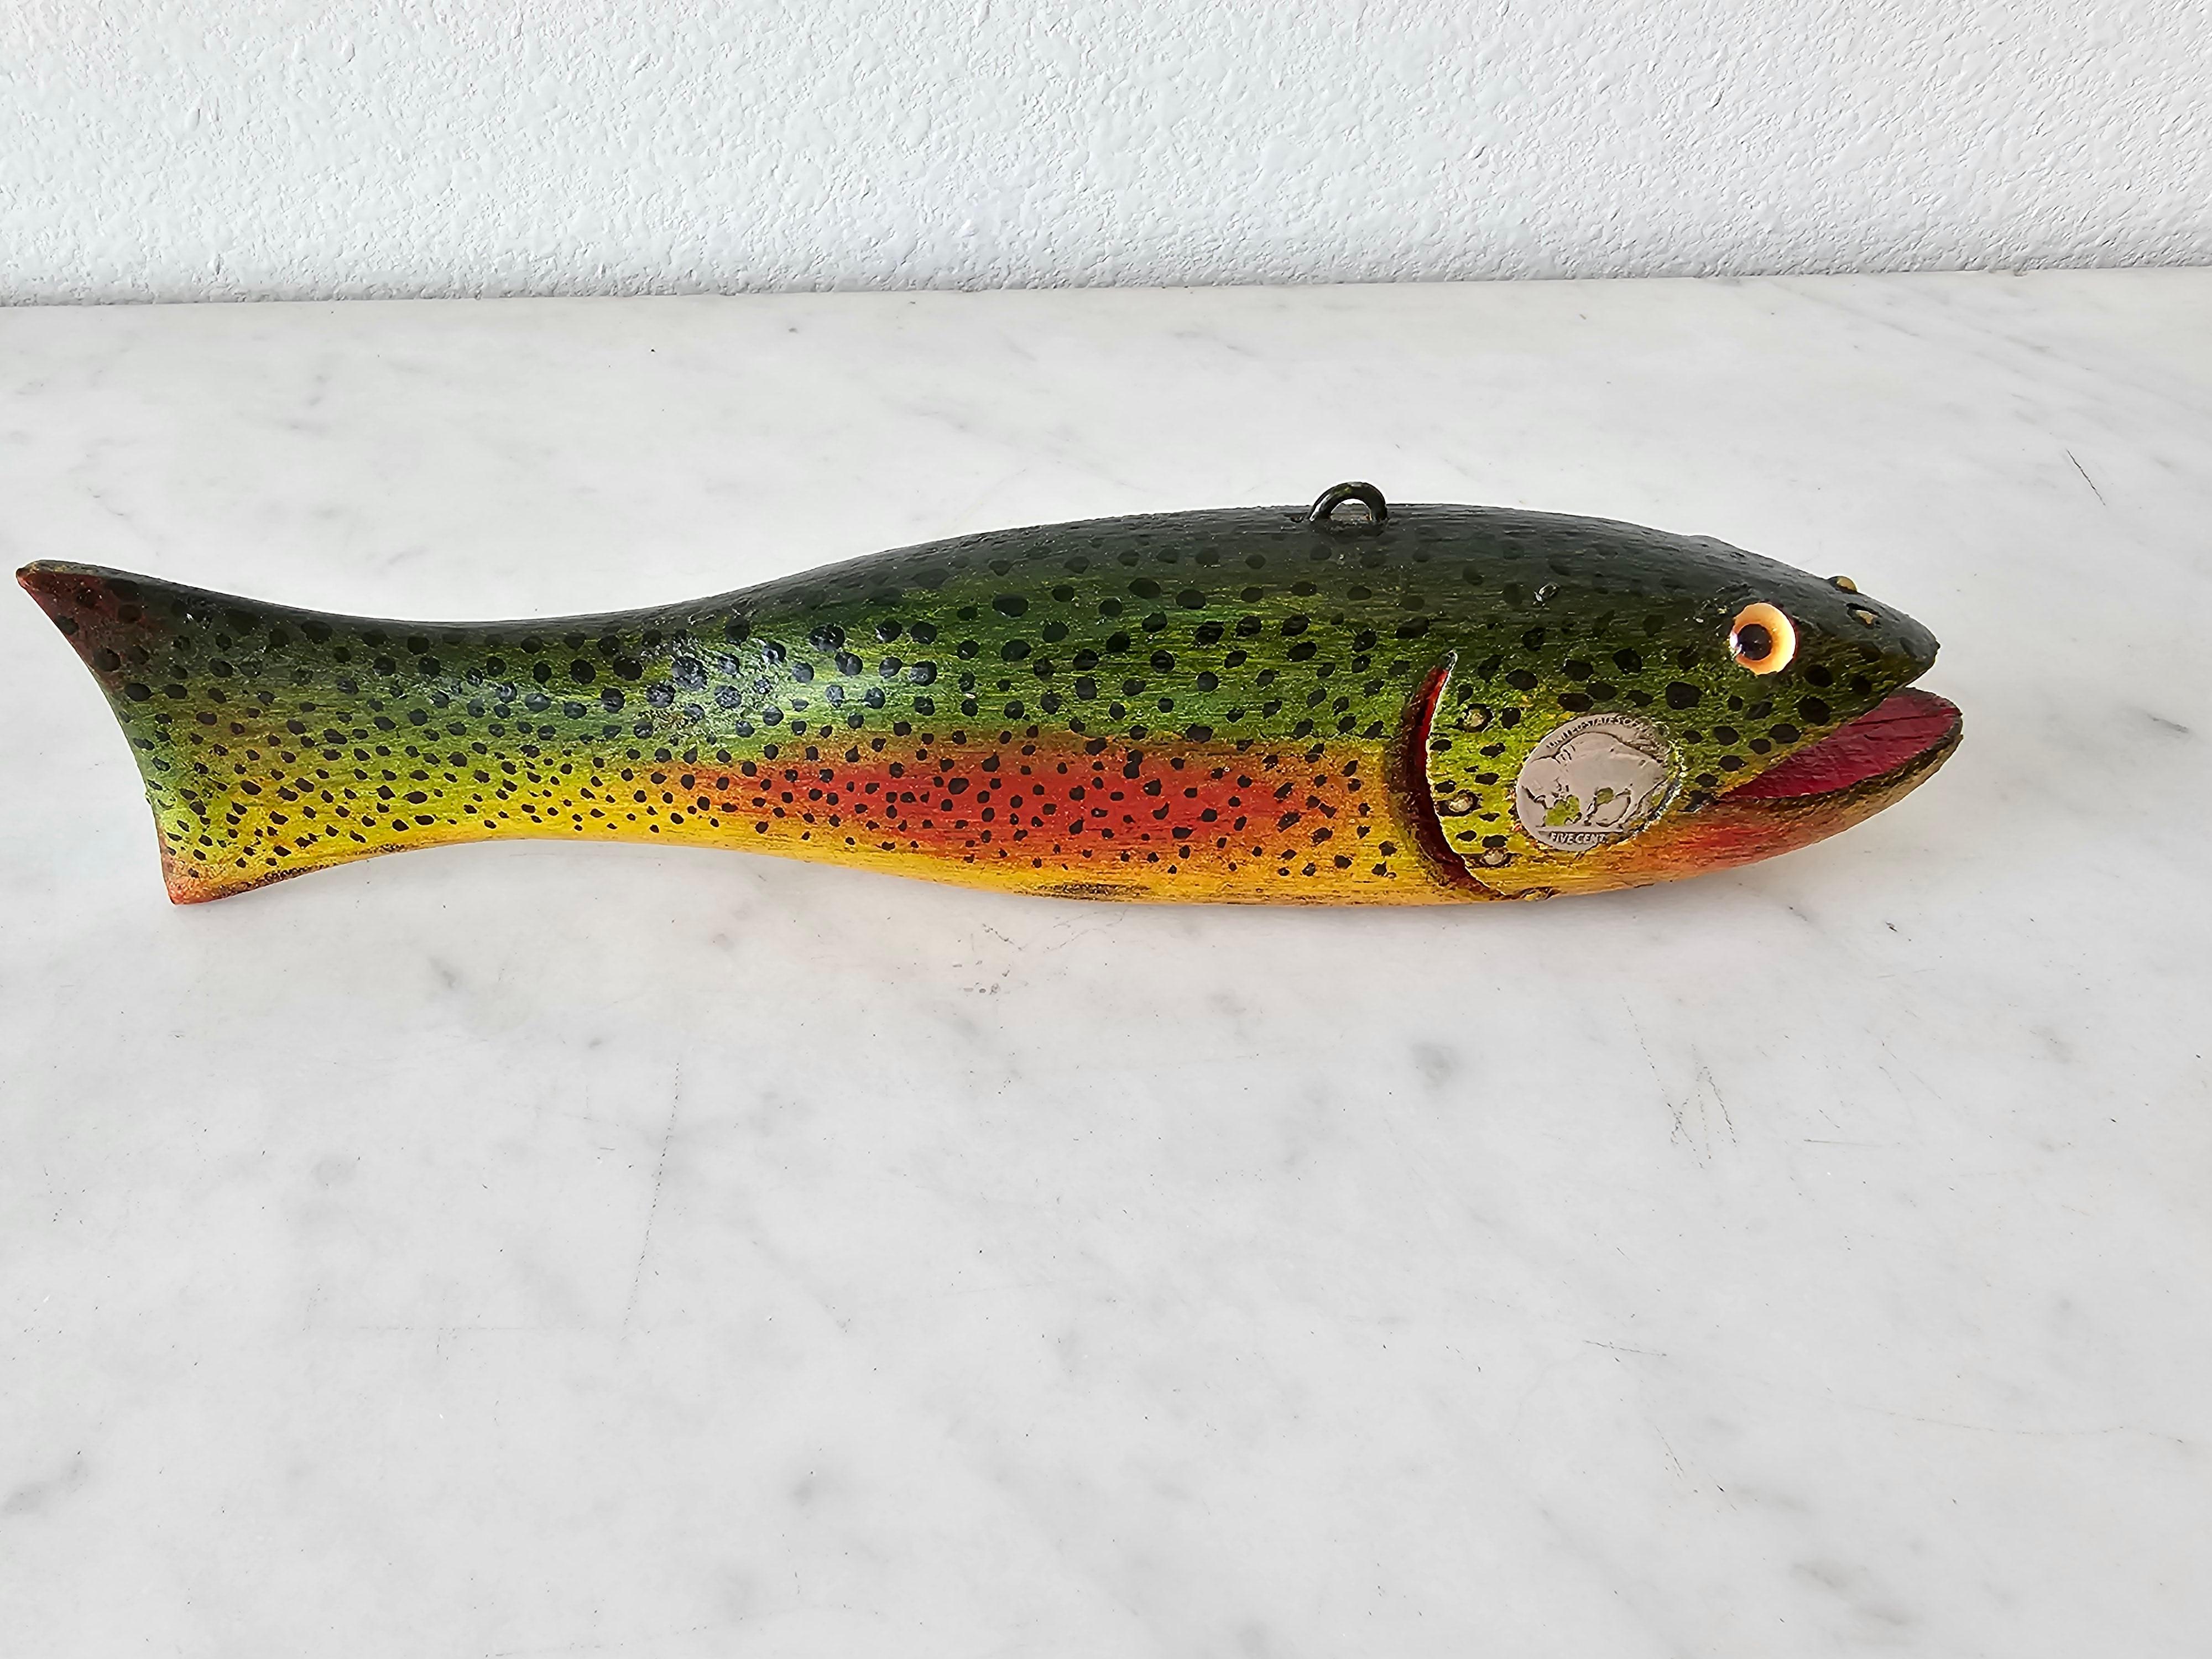 A rare one-of-a-kind Duluth Fish Decoy American Folk Art sculpture, depicting a large rainbow trout, hand carved by the late David Earl Perkins (Duluth, Minnesota, 1934-2018), featuring the original hand painted polychrome finish with realistic